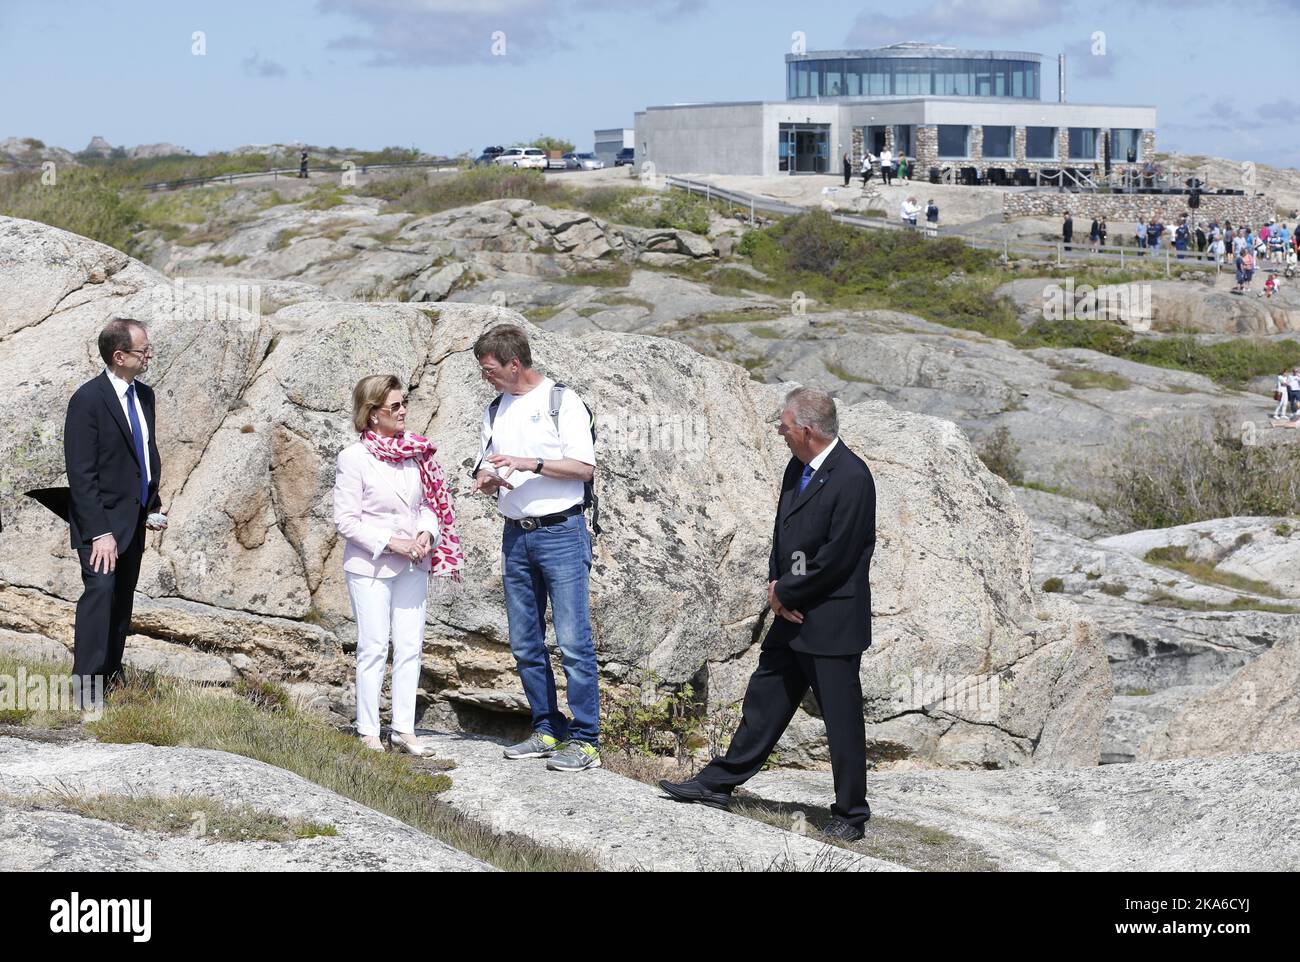 Faerder, Norway 20150627. HM Queen Sonja arrives Faerder National Park at Verdens Ende on Tjoemoe. Amateur geologist Terje Kristiansen talks about the area. Mayr Jan Marthiniussen (left) and County Governor Erling Lae (right) Foto: Terje Bendiksby / NTB scanpix  Stock Photo